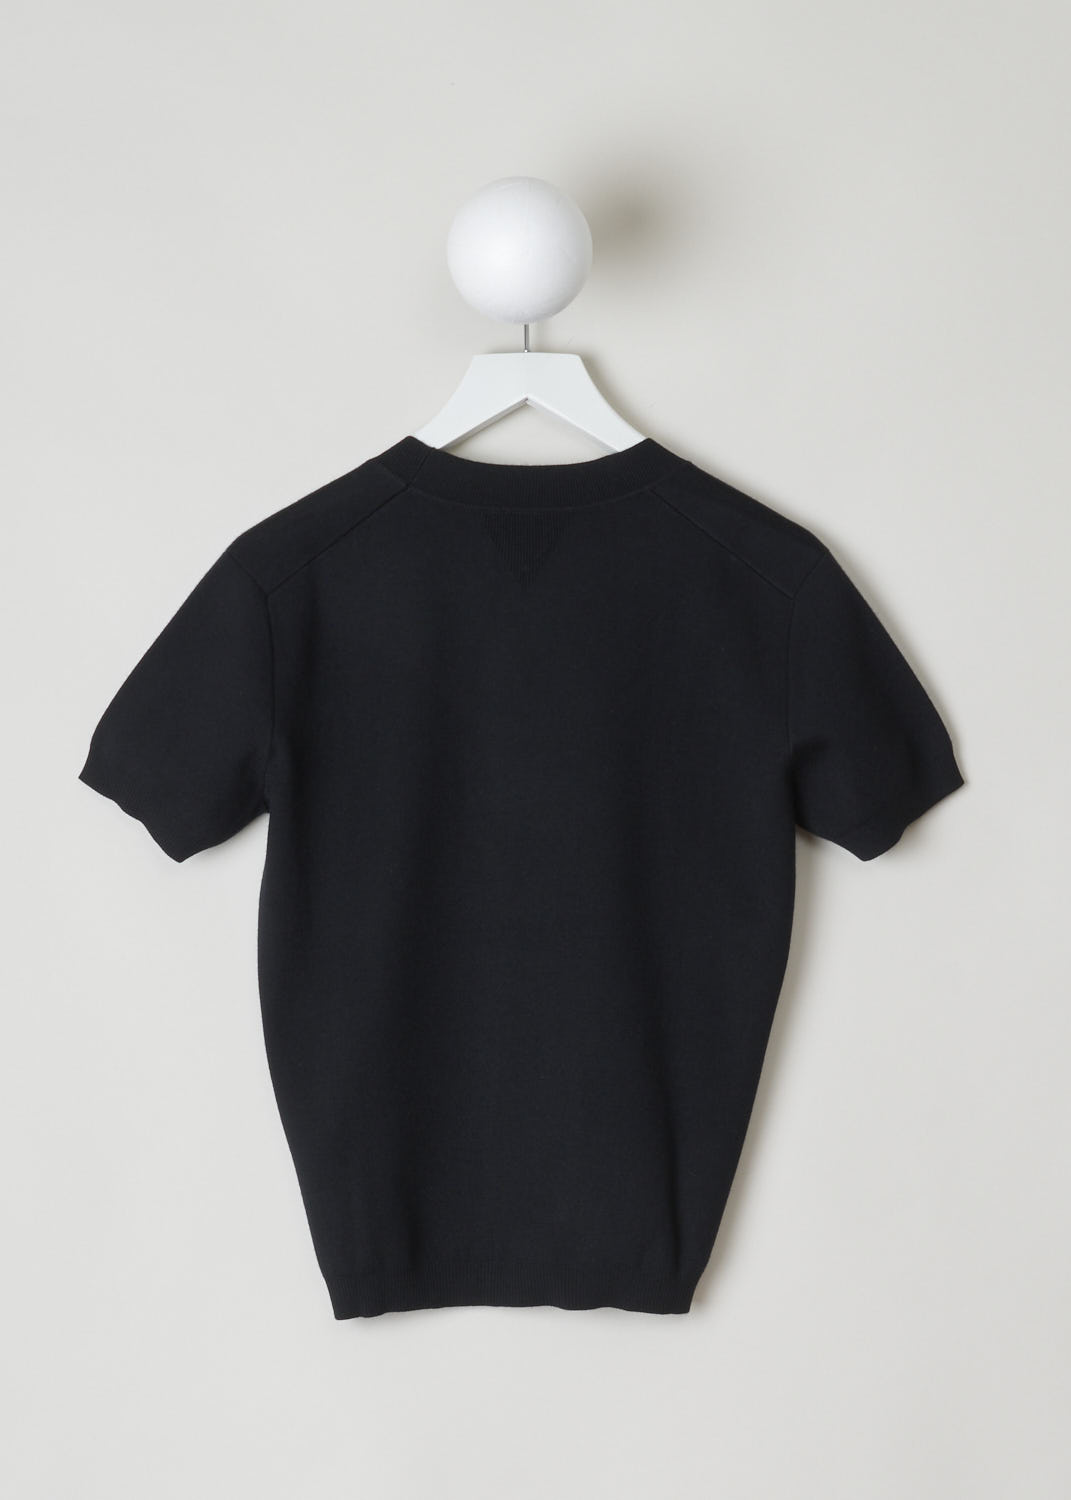 BOTTEGA VENETA, BLACK CASHMERE TOP, 647549_V0A50_1000, Black, Back, Black, short sleeved top. This cashmere top has a rounded collar with a ribbed finish. That same finish can be found along the cuffs and the hem. In the back of the neck, the signature Bottega Veneta triangle can be found. 
